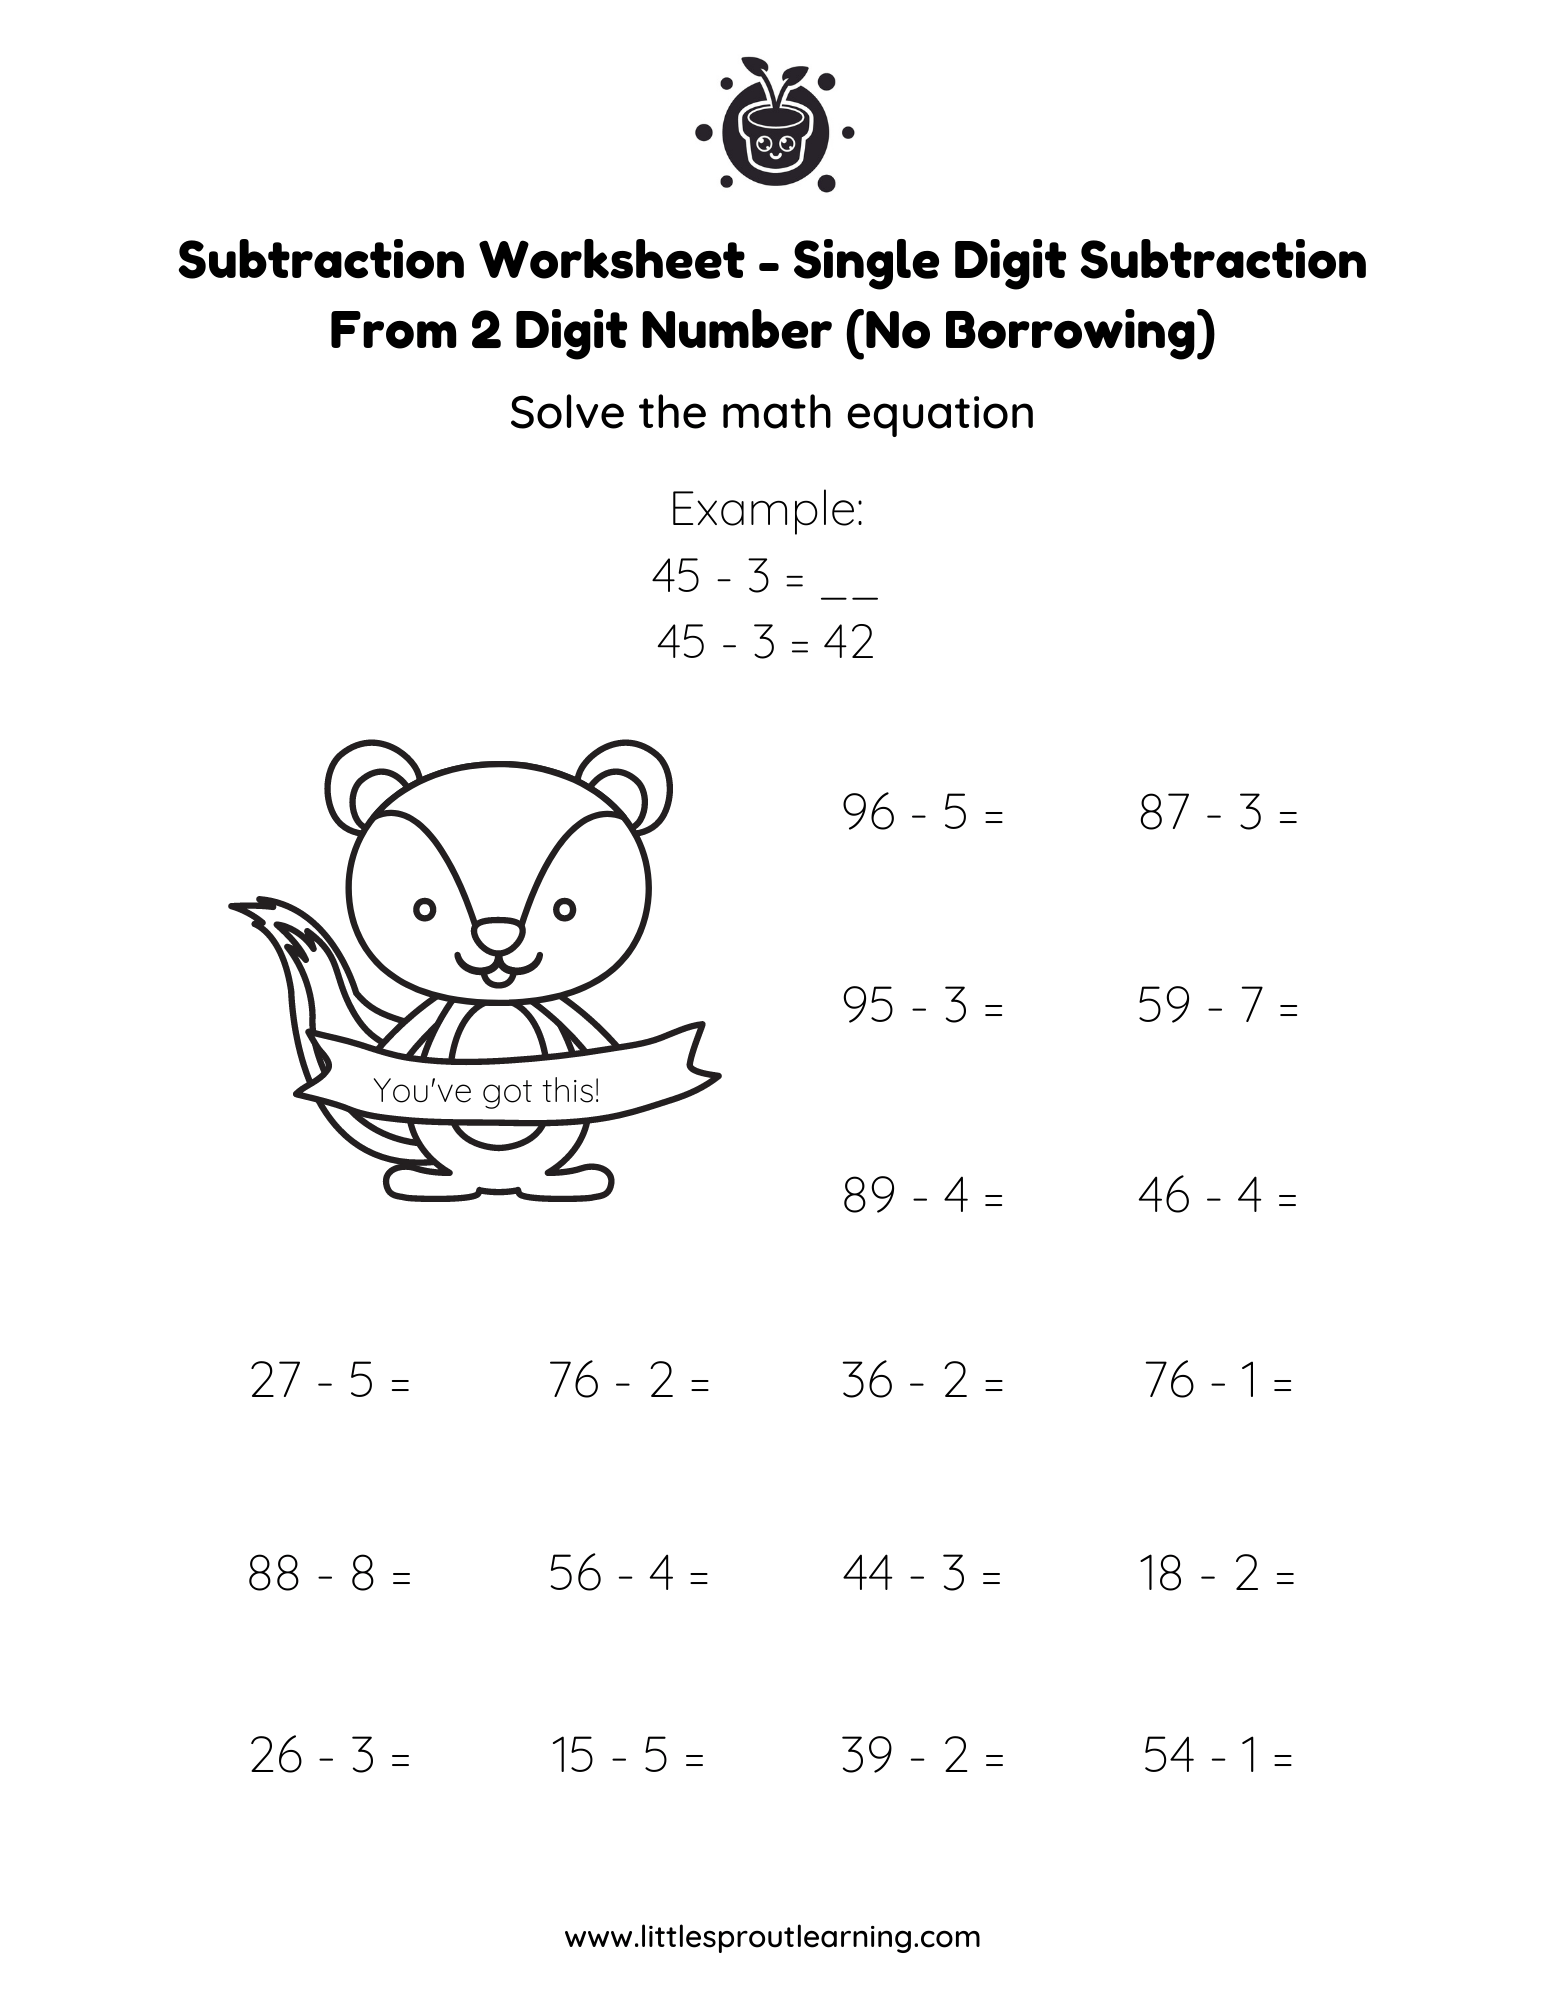 Single Digit Subtraction From 2 Digit Numbers (No Borrowing)